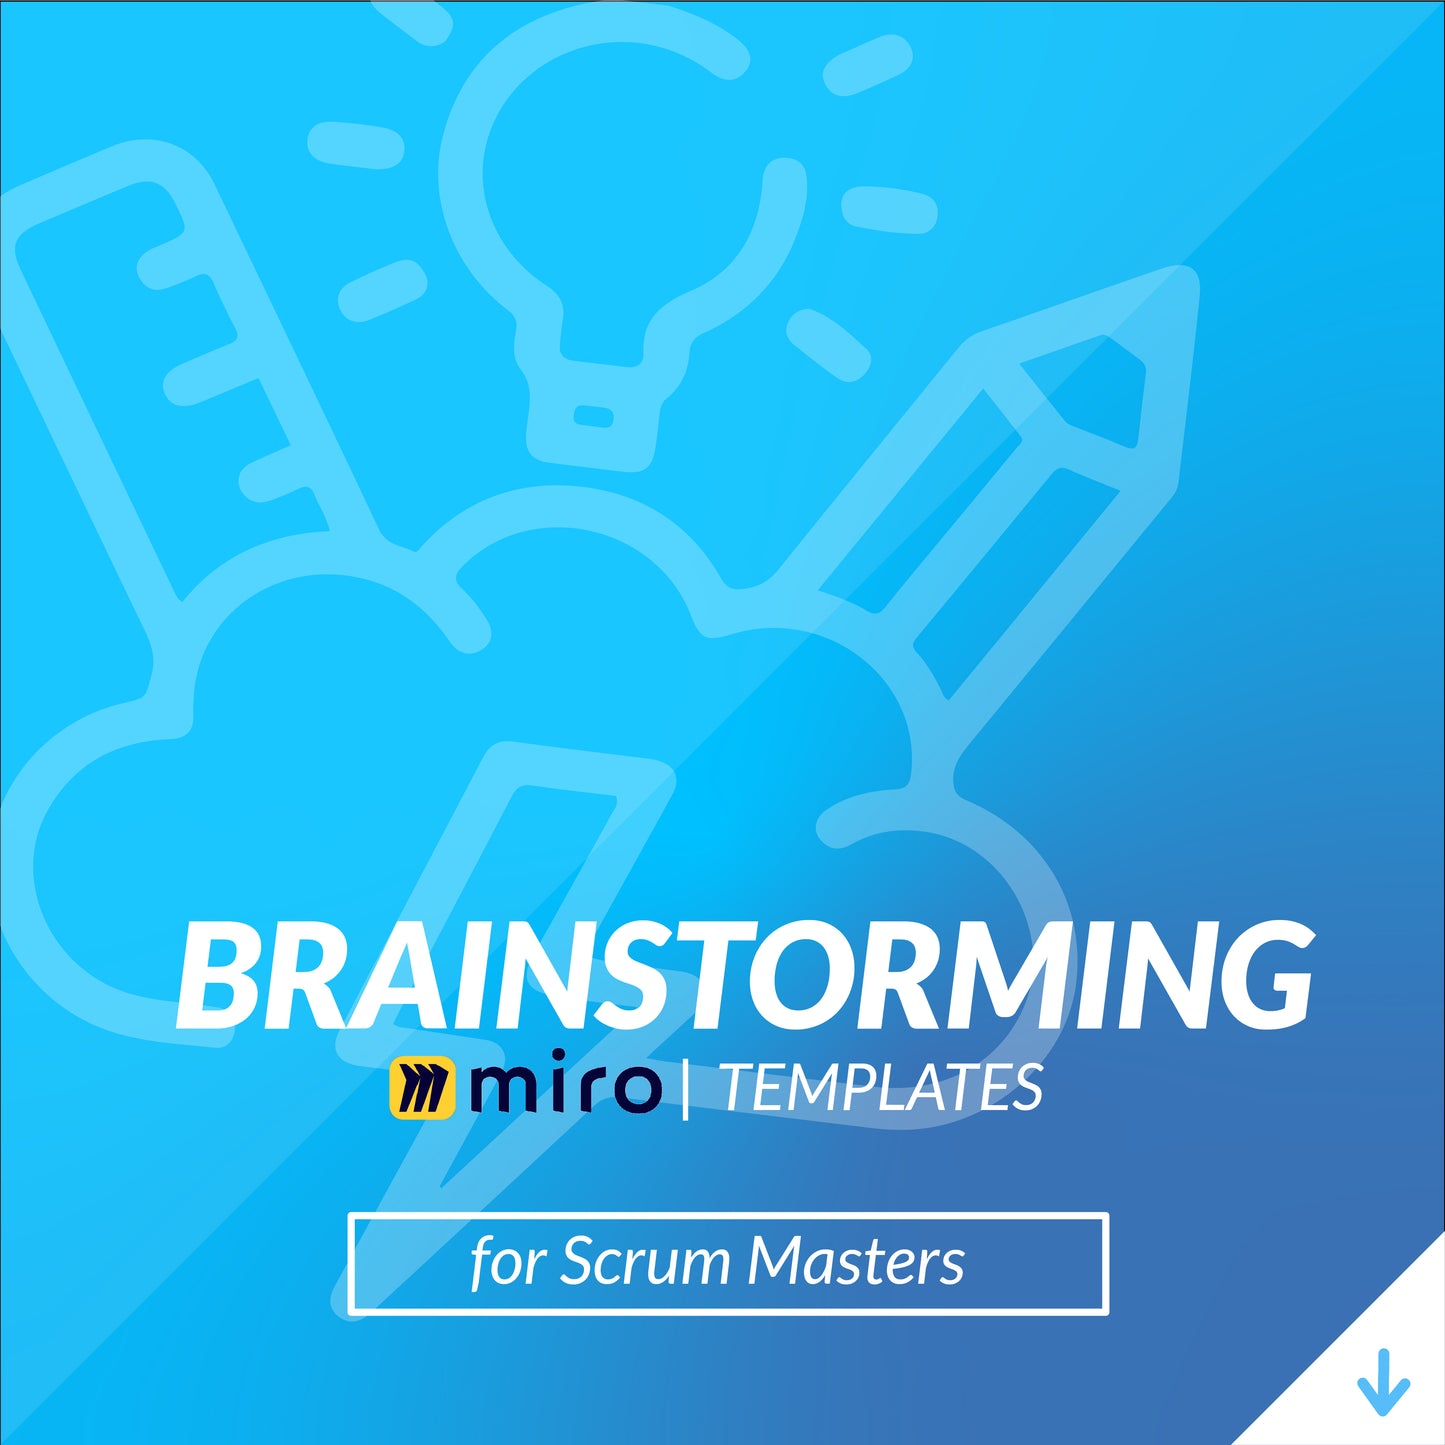 Brainstorming Miro Templates for Scrum Masters